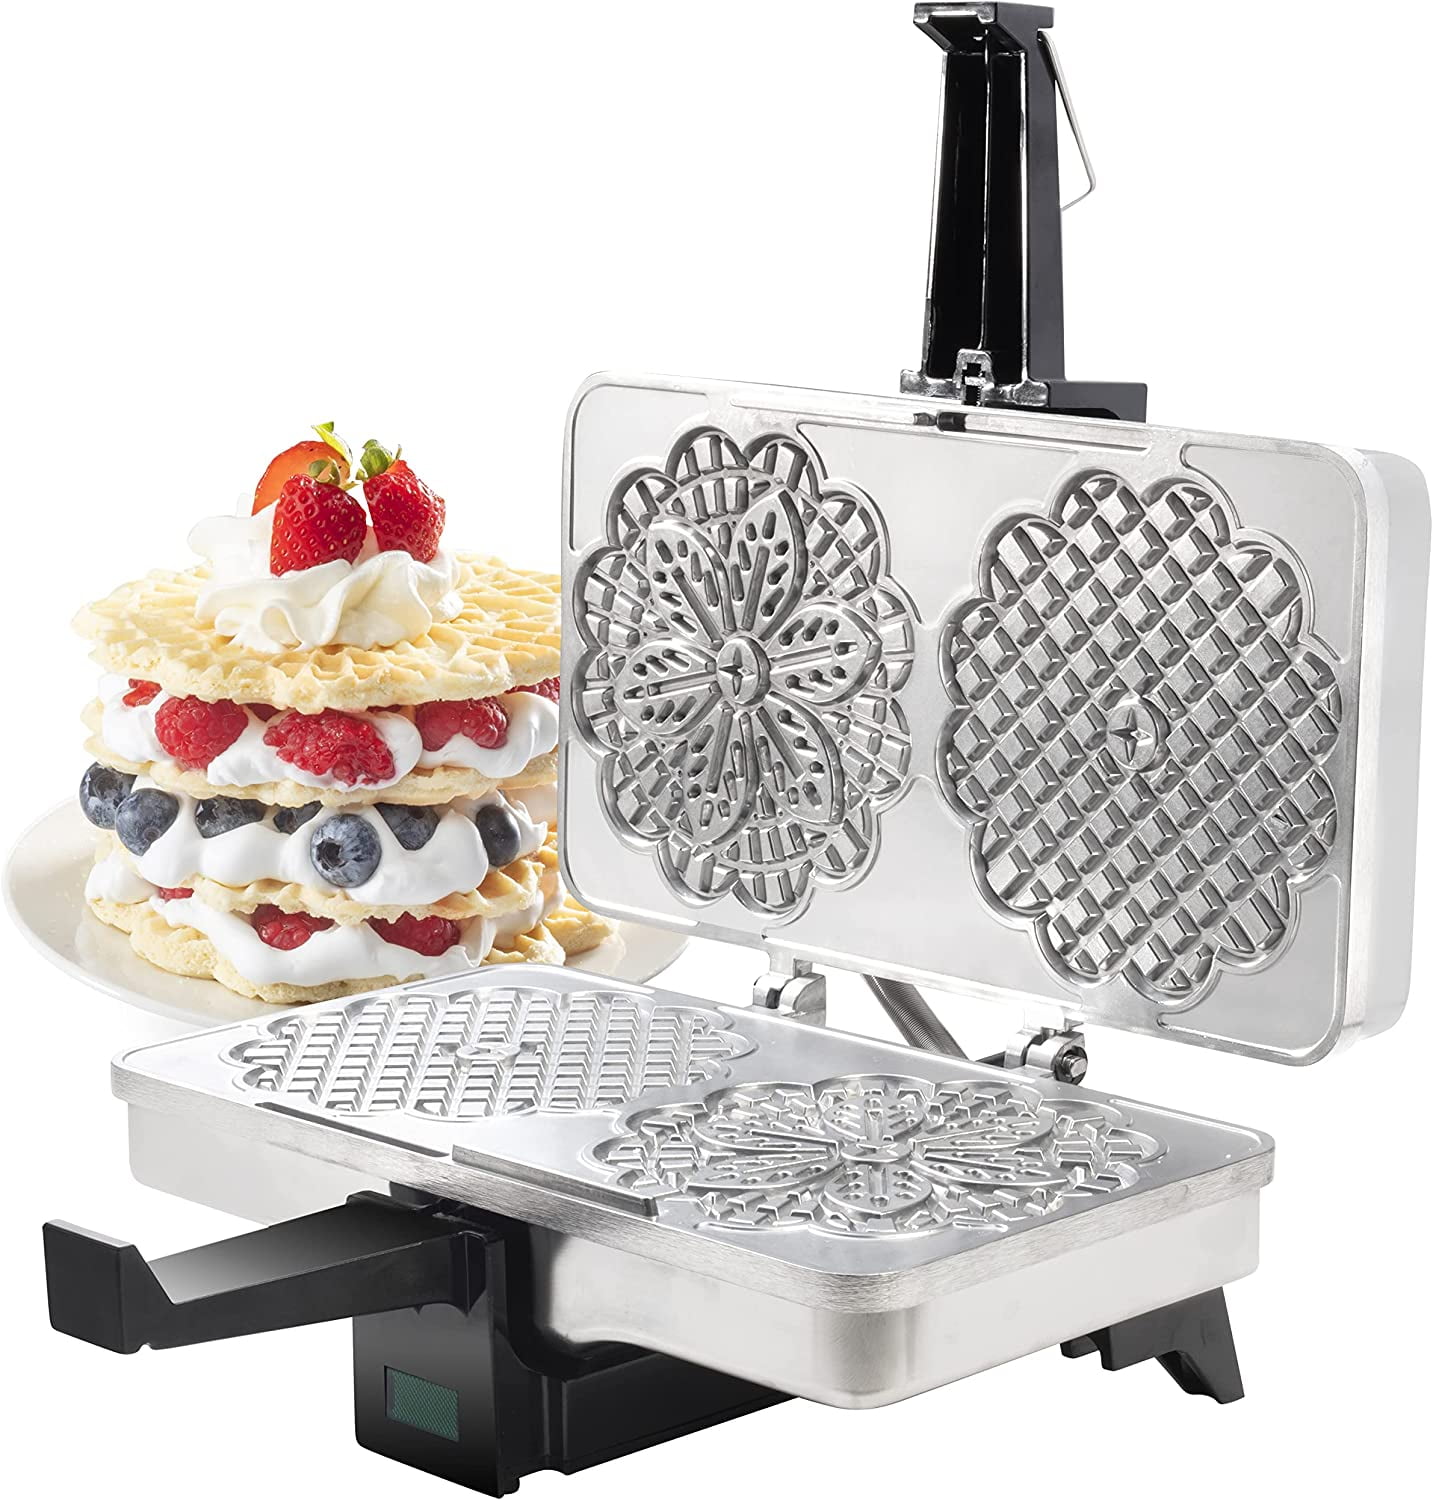 CucinaPro Piccolo Pizzelle Baker - Electric Press Makes 4 Mini Cookies at  Once, Grey Nonstick Interior For Fast Cleanup, Must Have Gift or Treat for